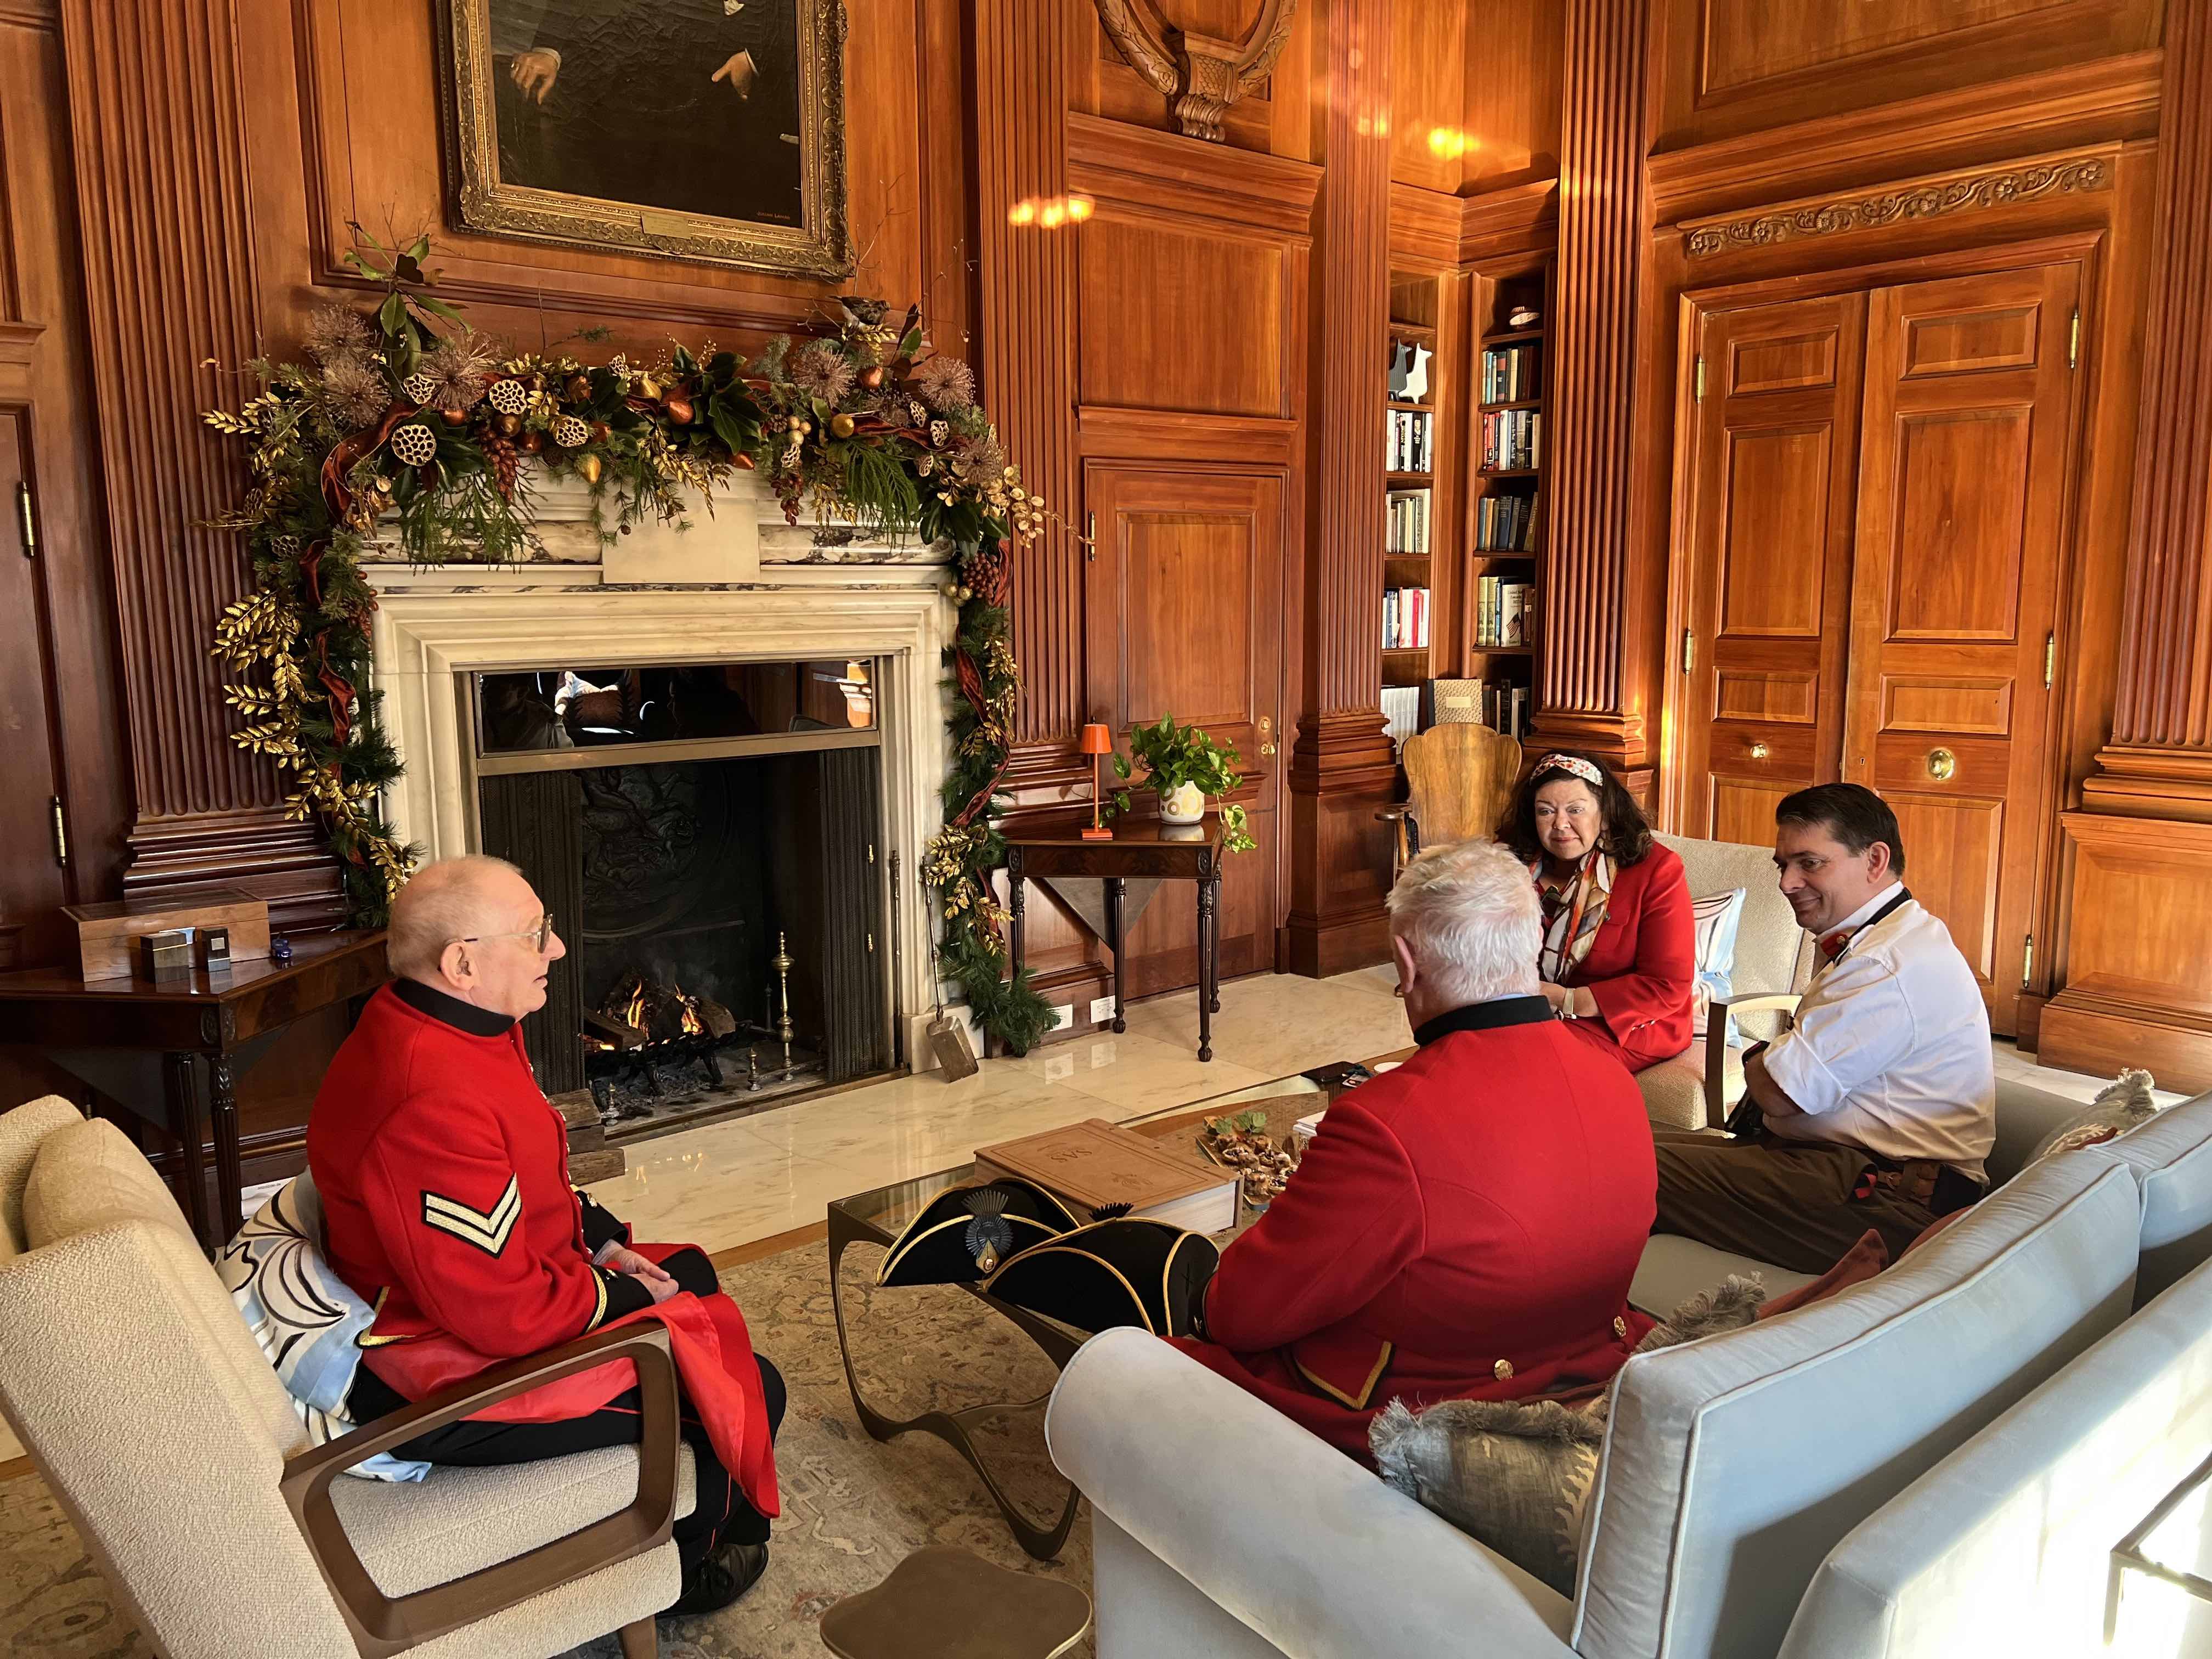 Chelsea Pensioners in Scarlet Uniforms sitting with the Lady Ambassador round a table